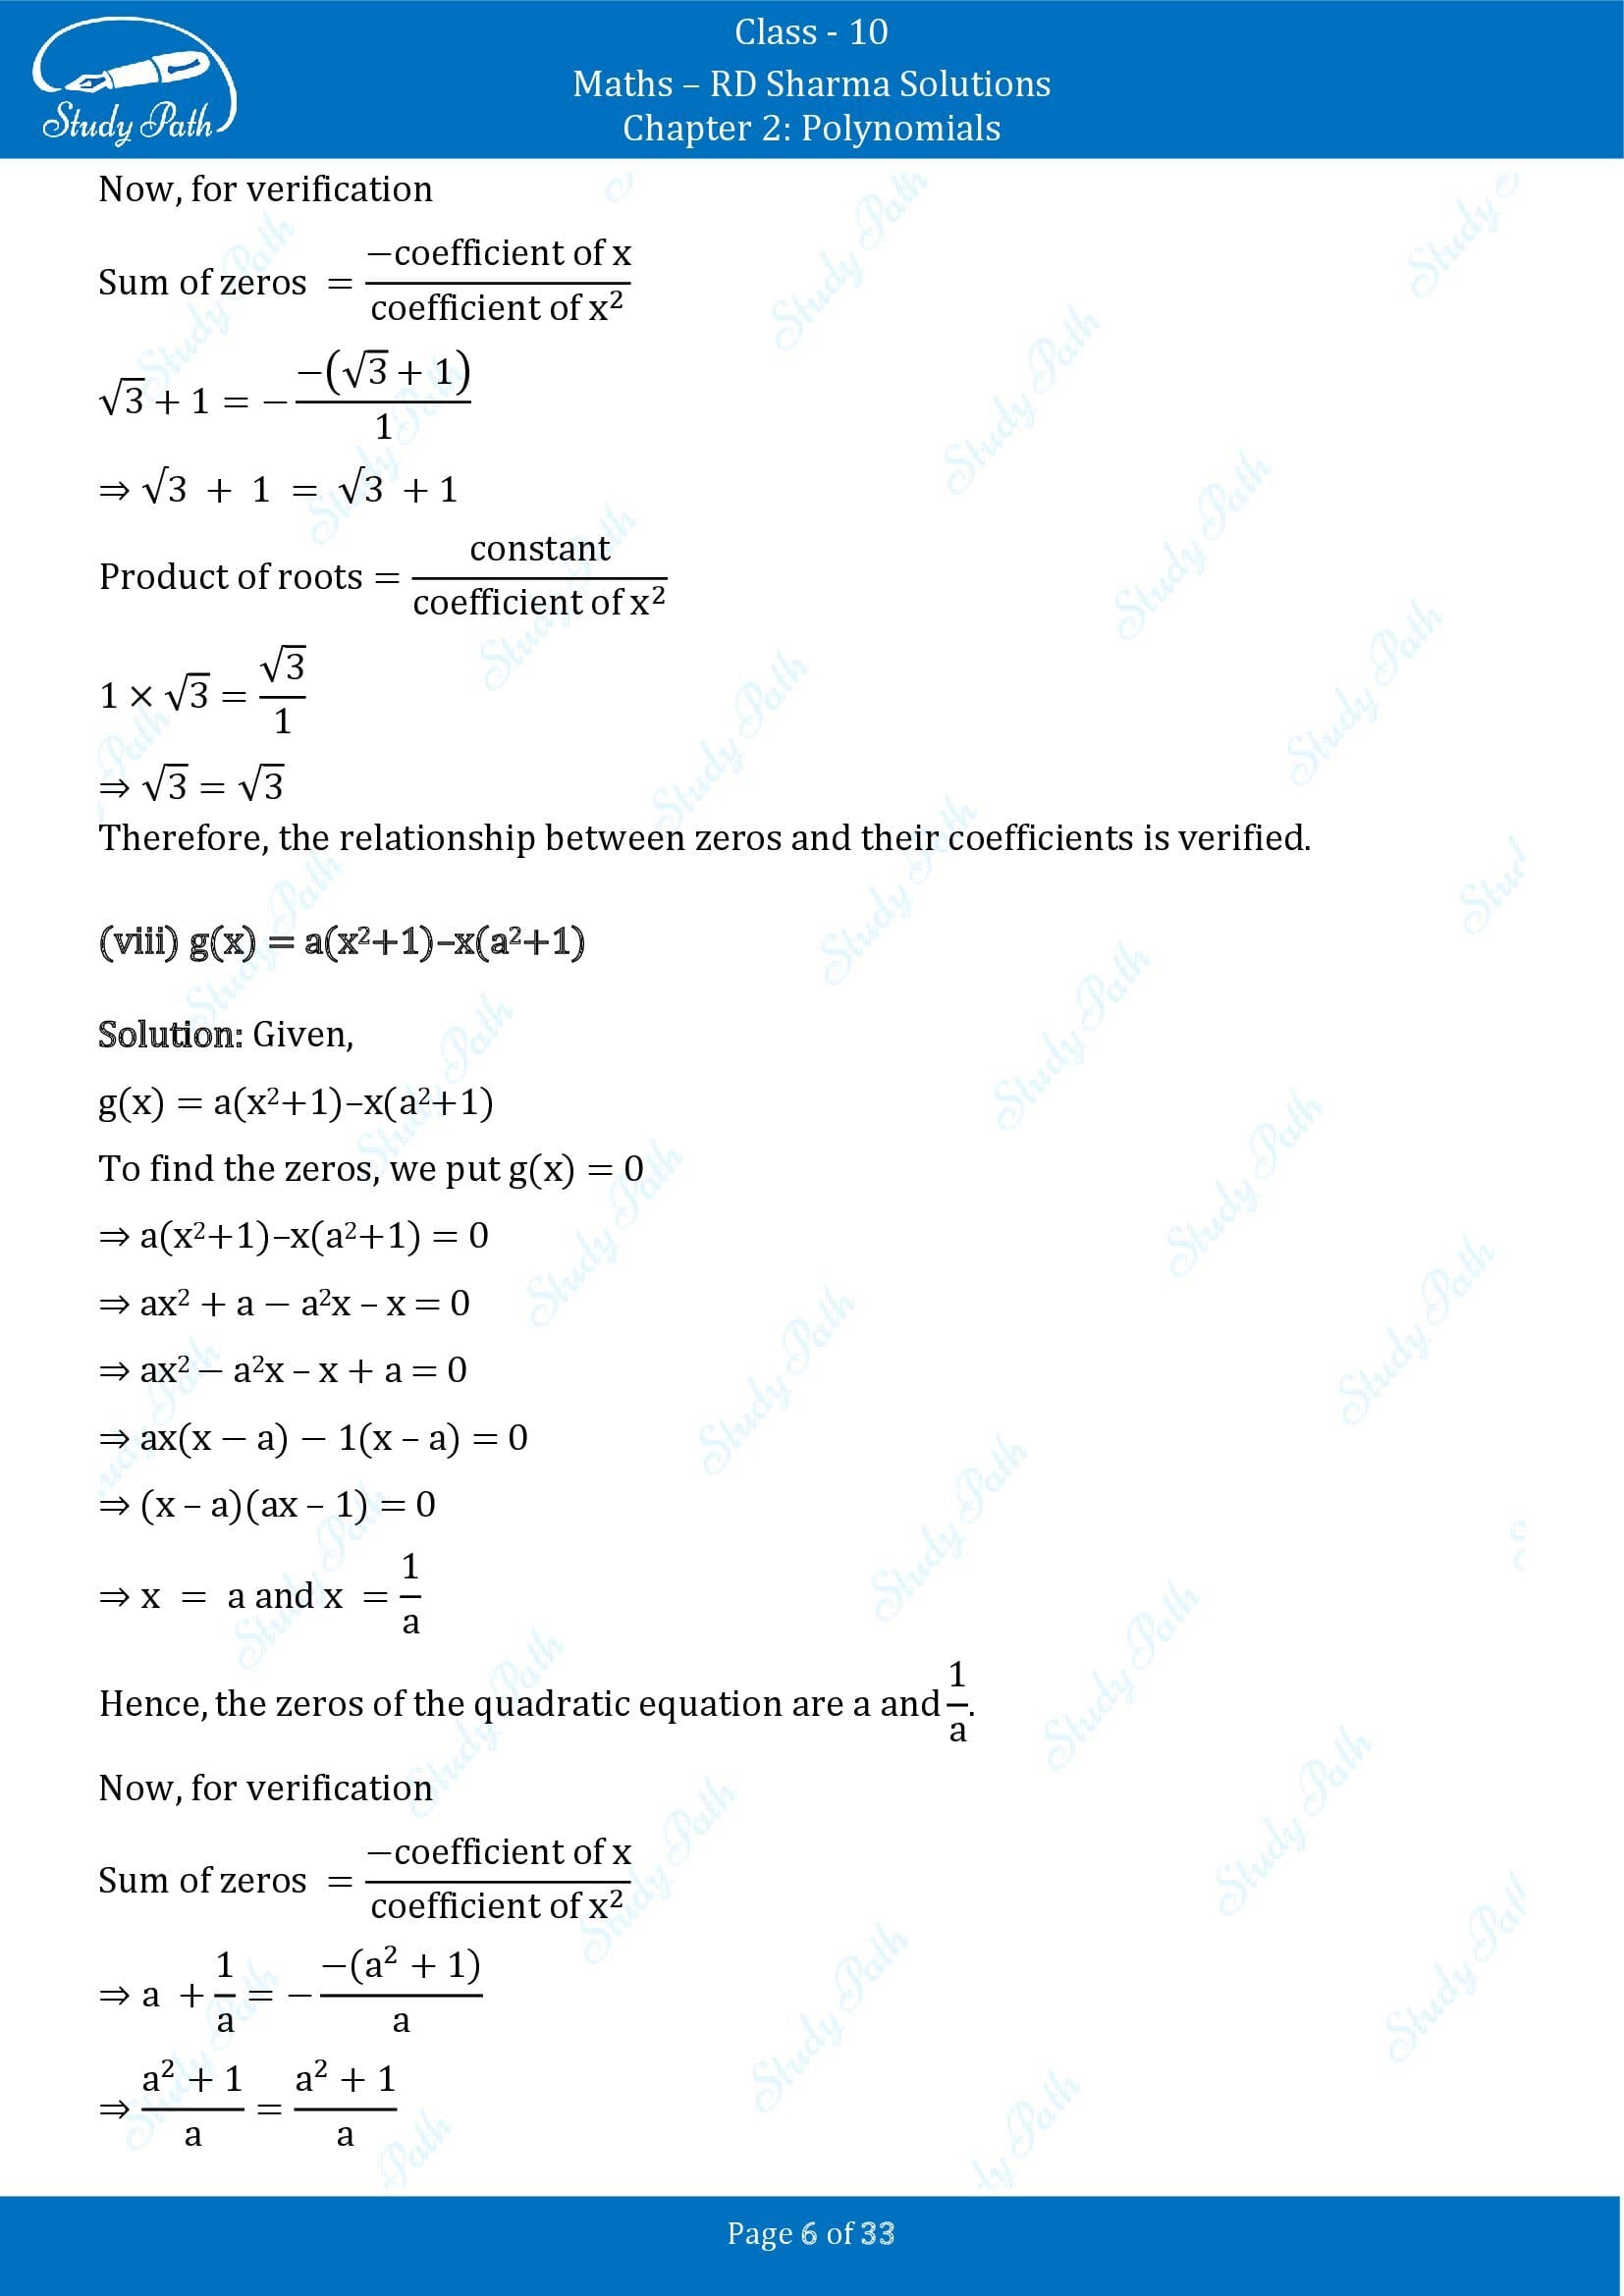 RD Sharma Solutions Class 10 Chapter 2 Polynomials Exercise 2.1 00006